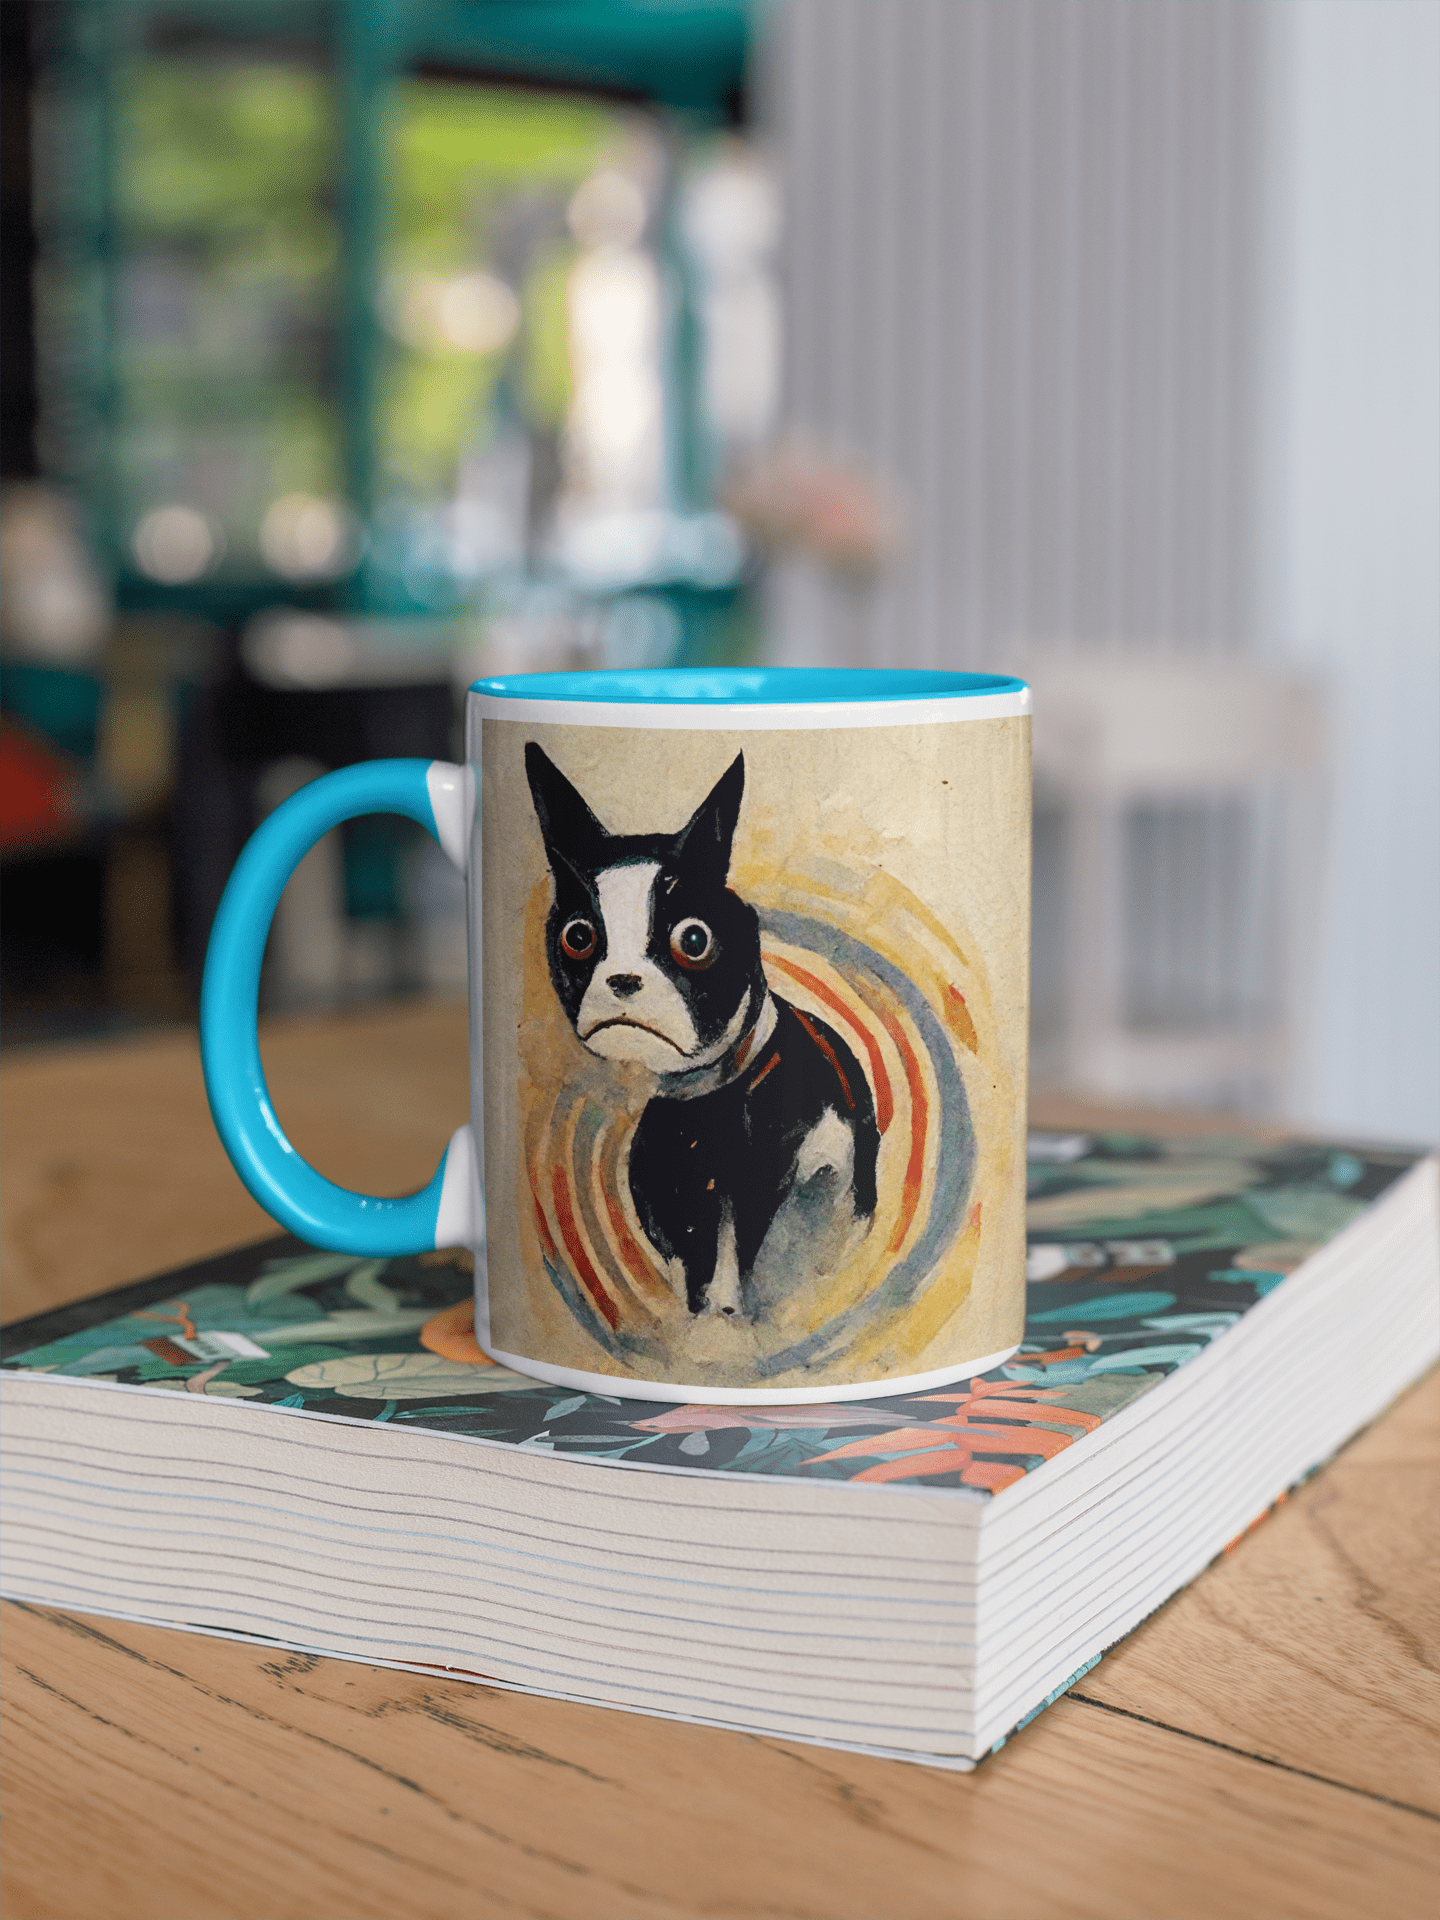 Mug featuring Boston Terrier in the style of Edvard Munch’s “The Scream”